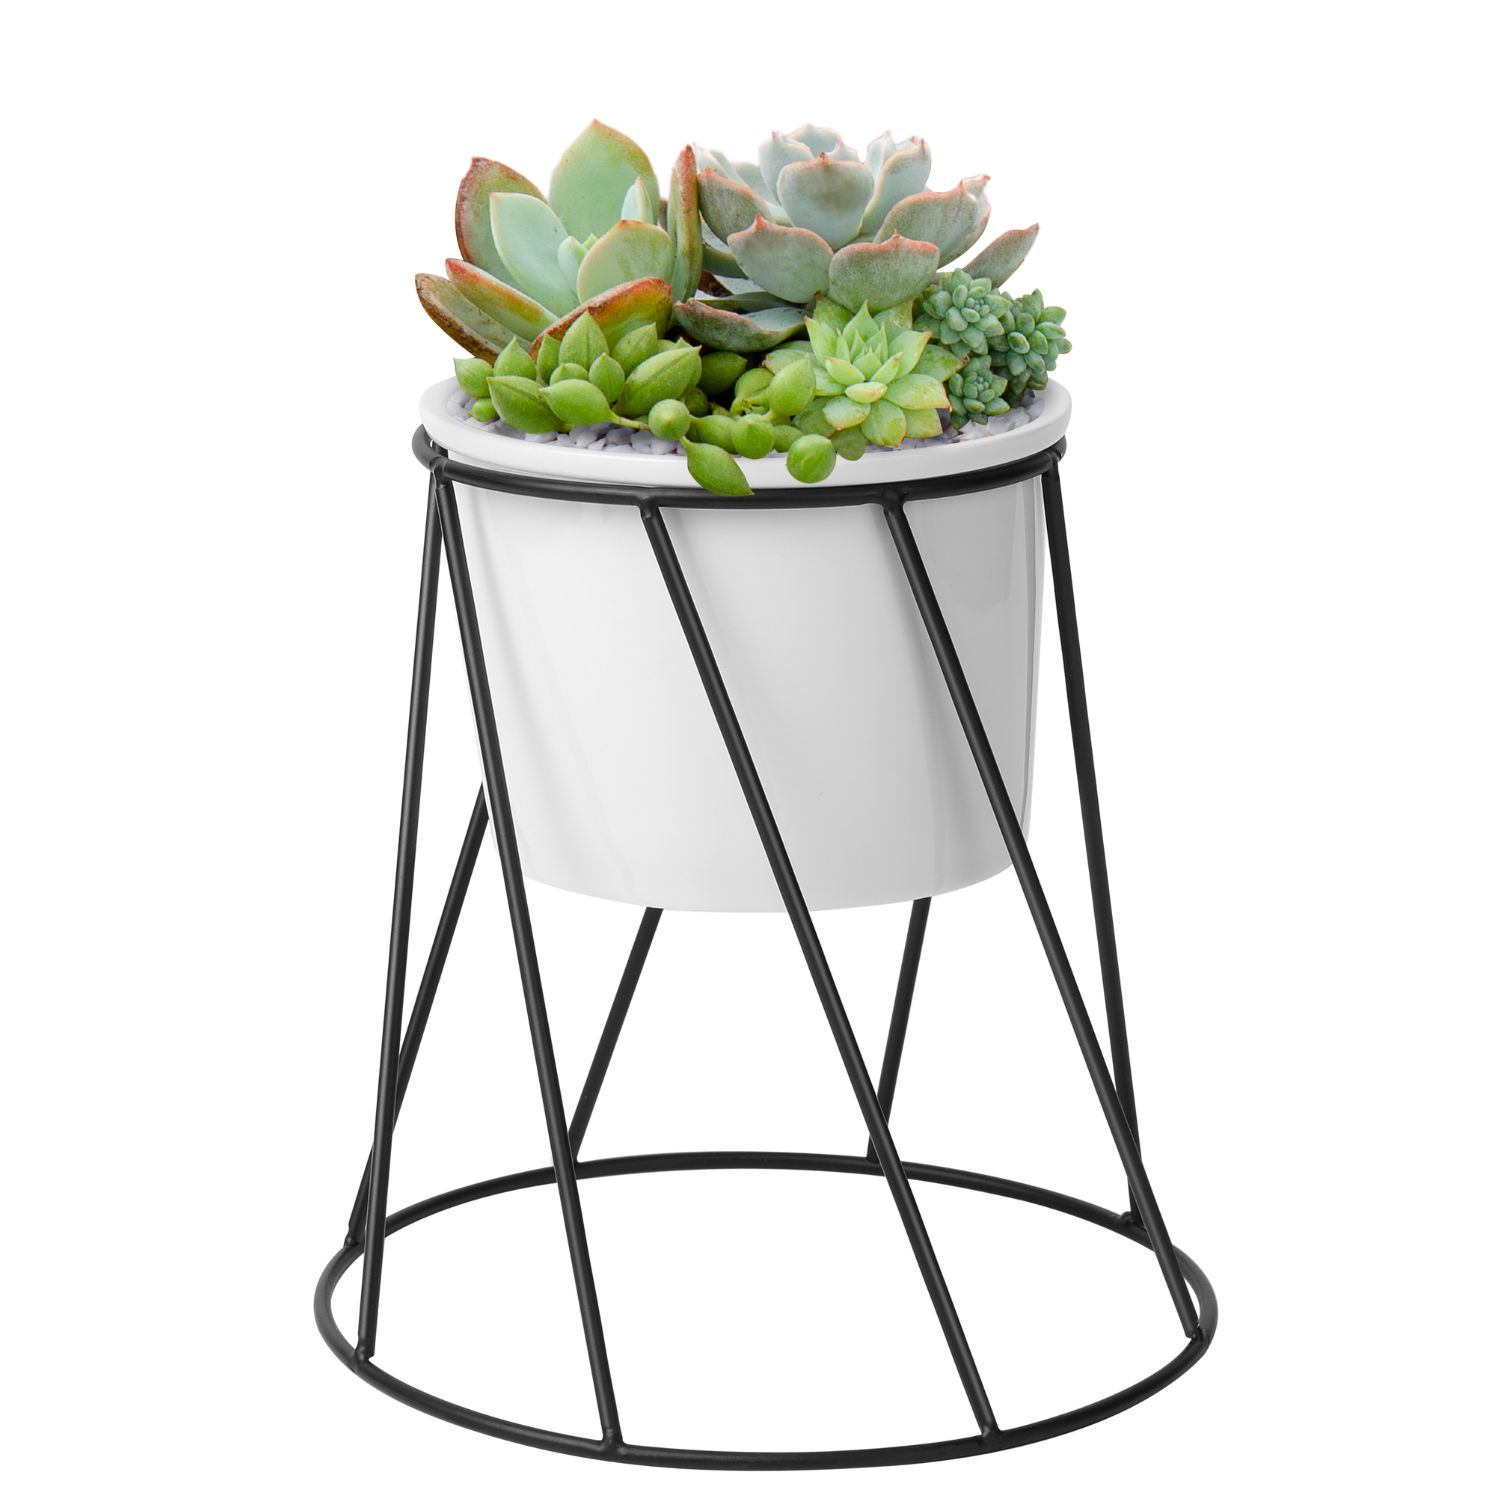 Featured image of post Round Planter On Stand - Give everyone green envy with modern planters and garden pots.